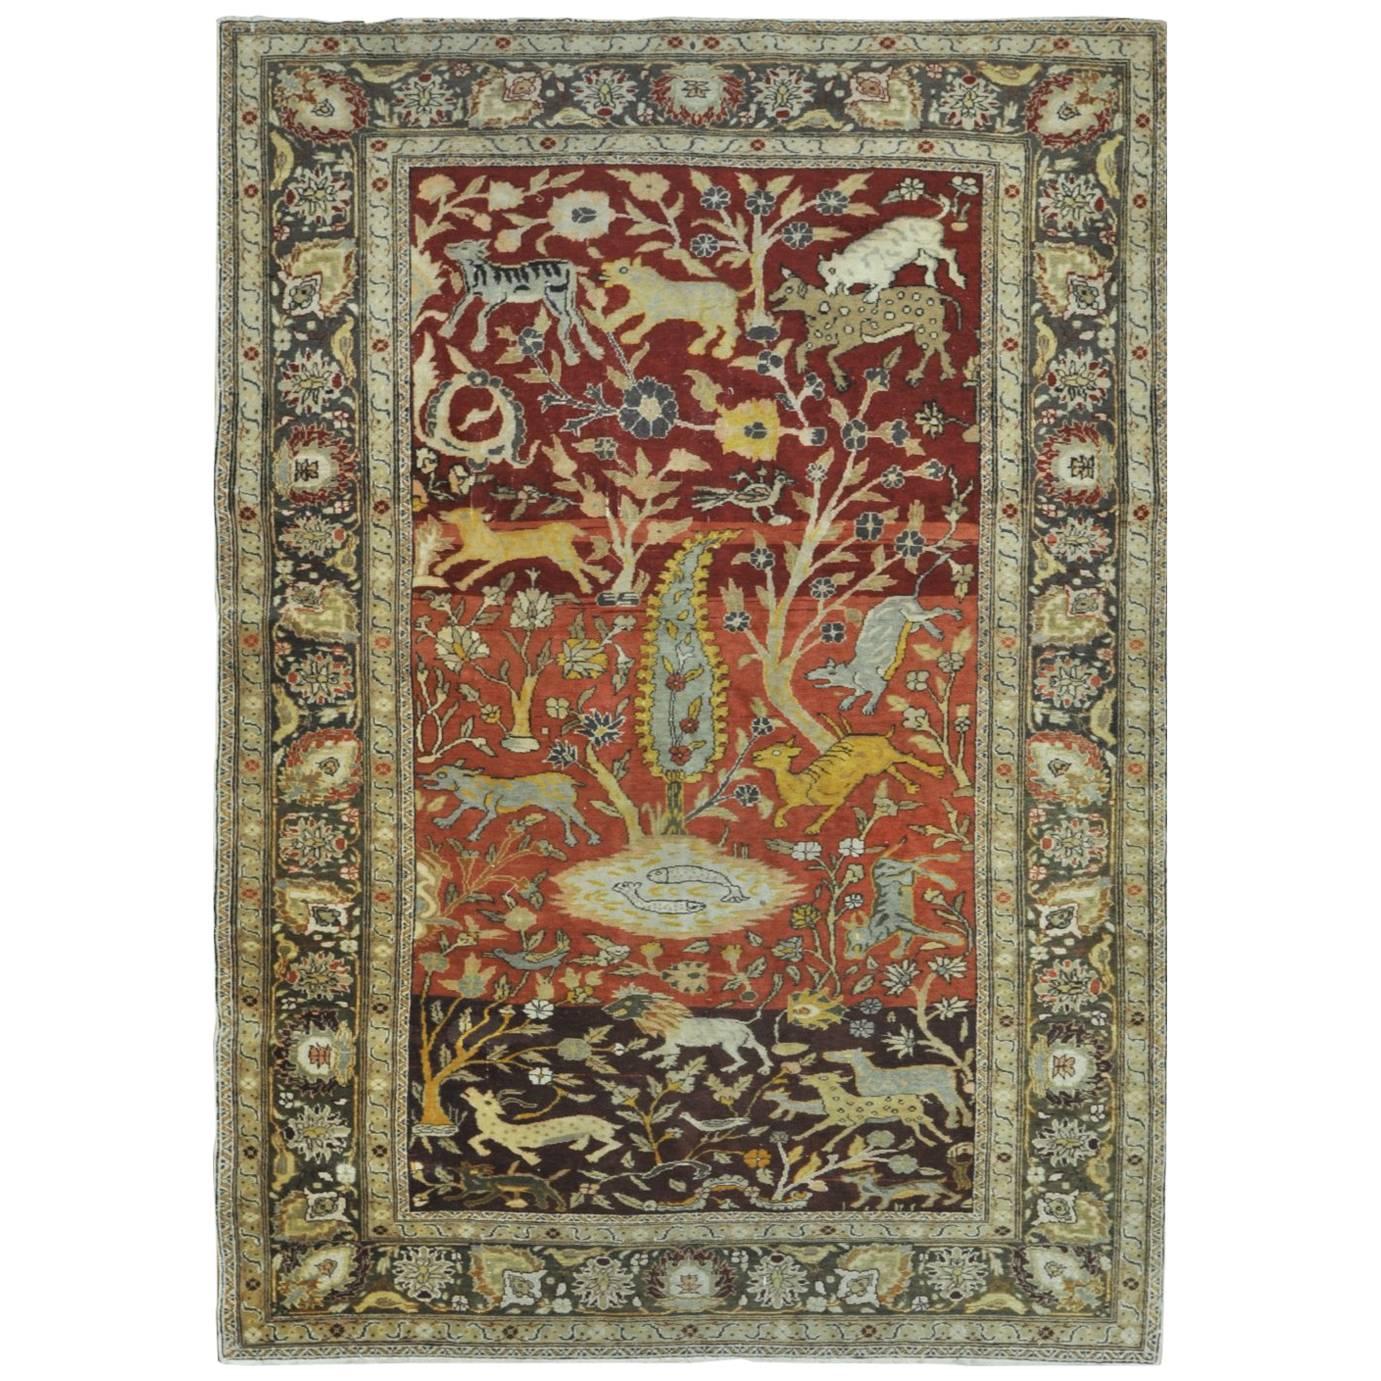 Small Semi-Antique Hand-Knotted Wool Pictorial Turkish Rug